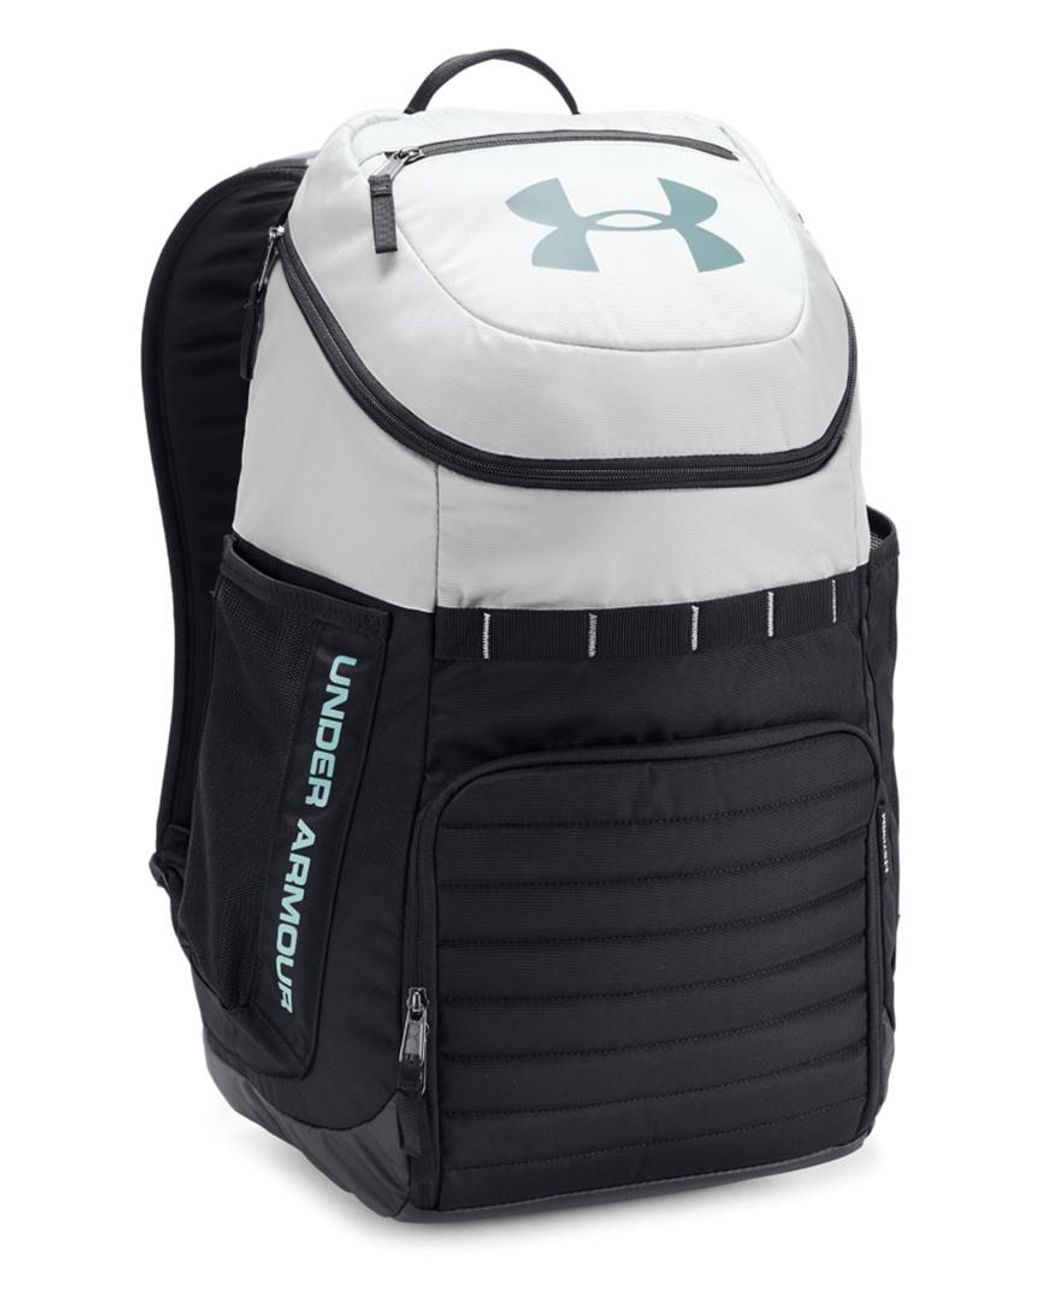 Under Armour Ua Undeniable 3.0 Backpack for Men